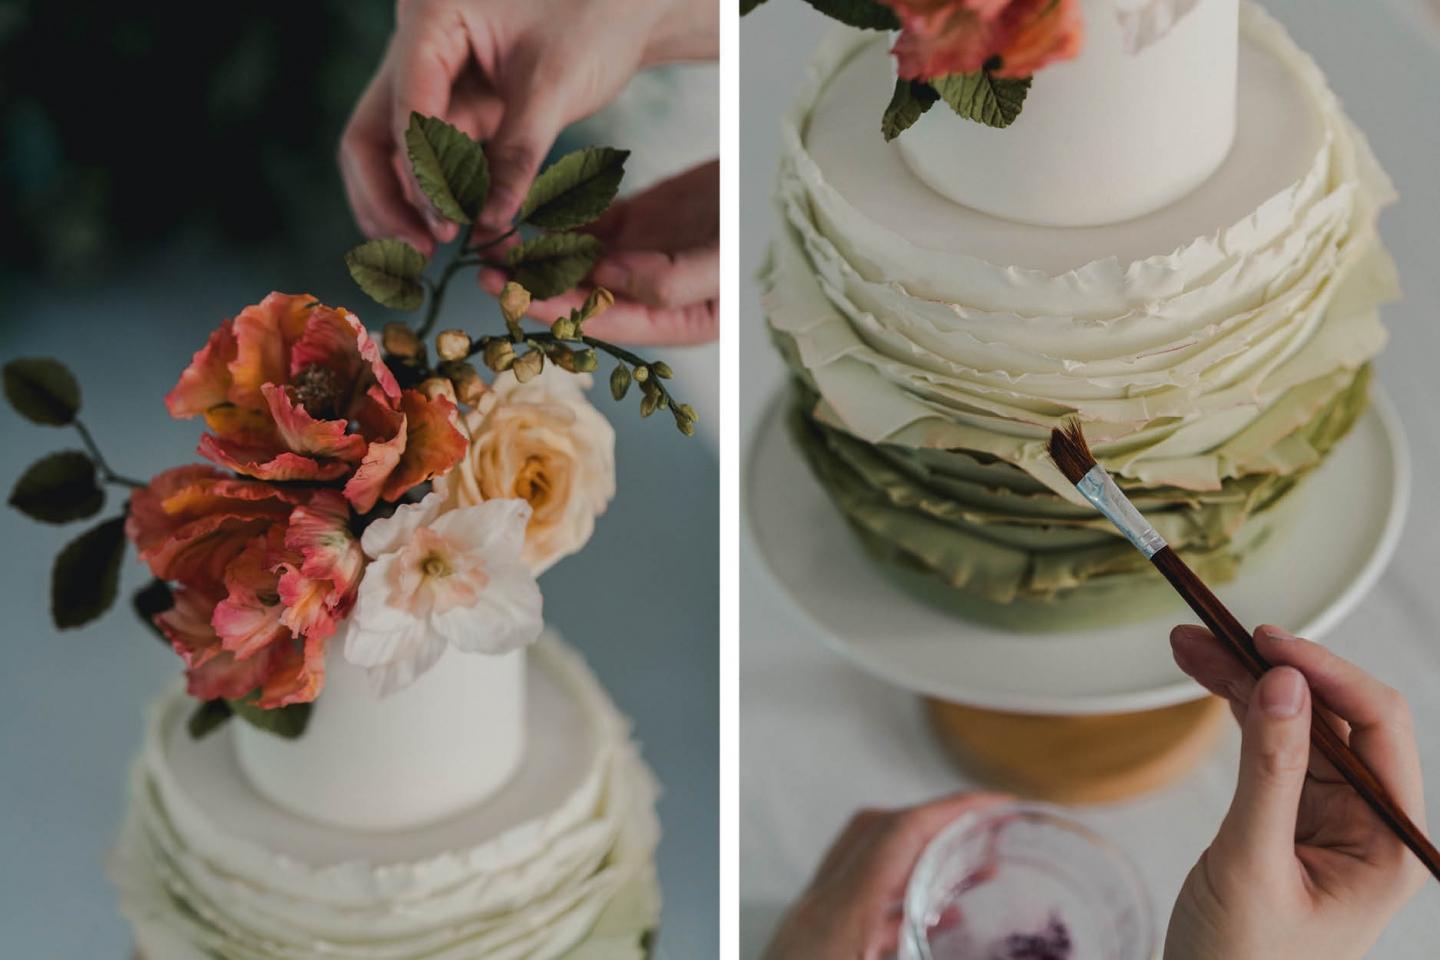 During an internship with Maggie Austin Cake in the US, Venus learnt the essential skills of sugar flower and wedding cake construction